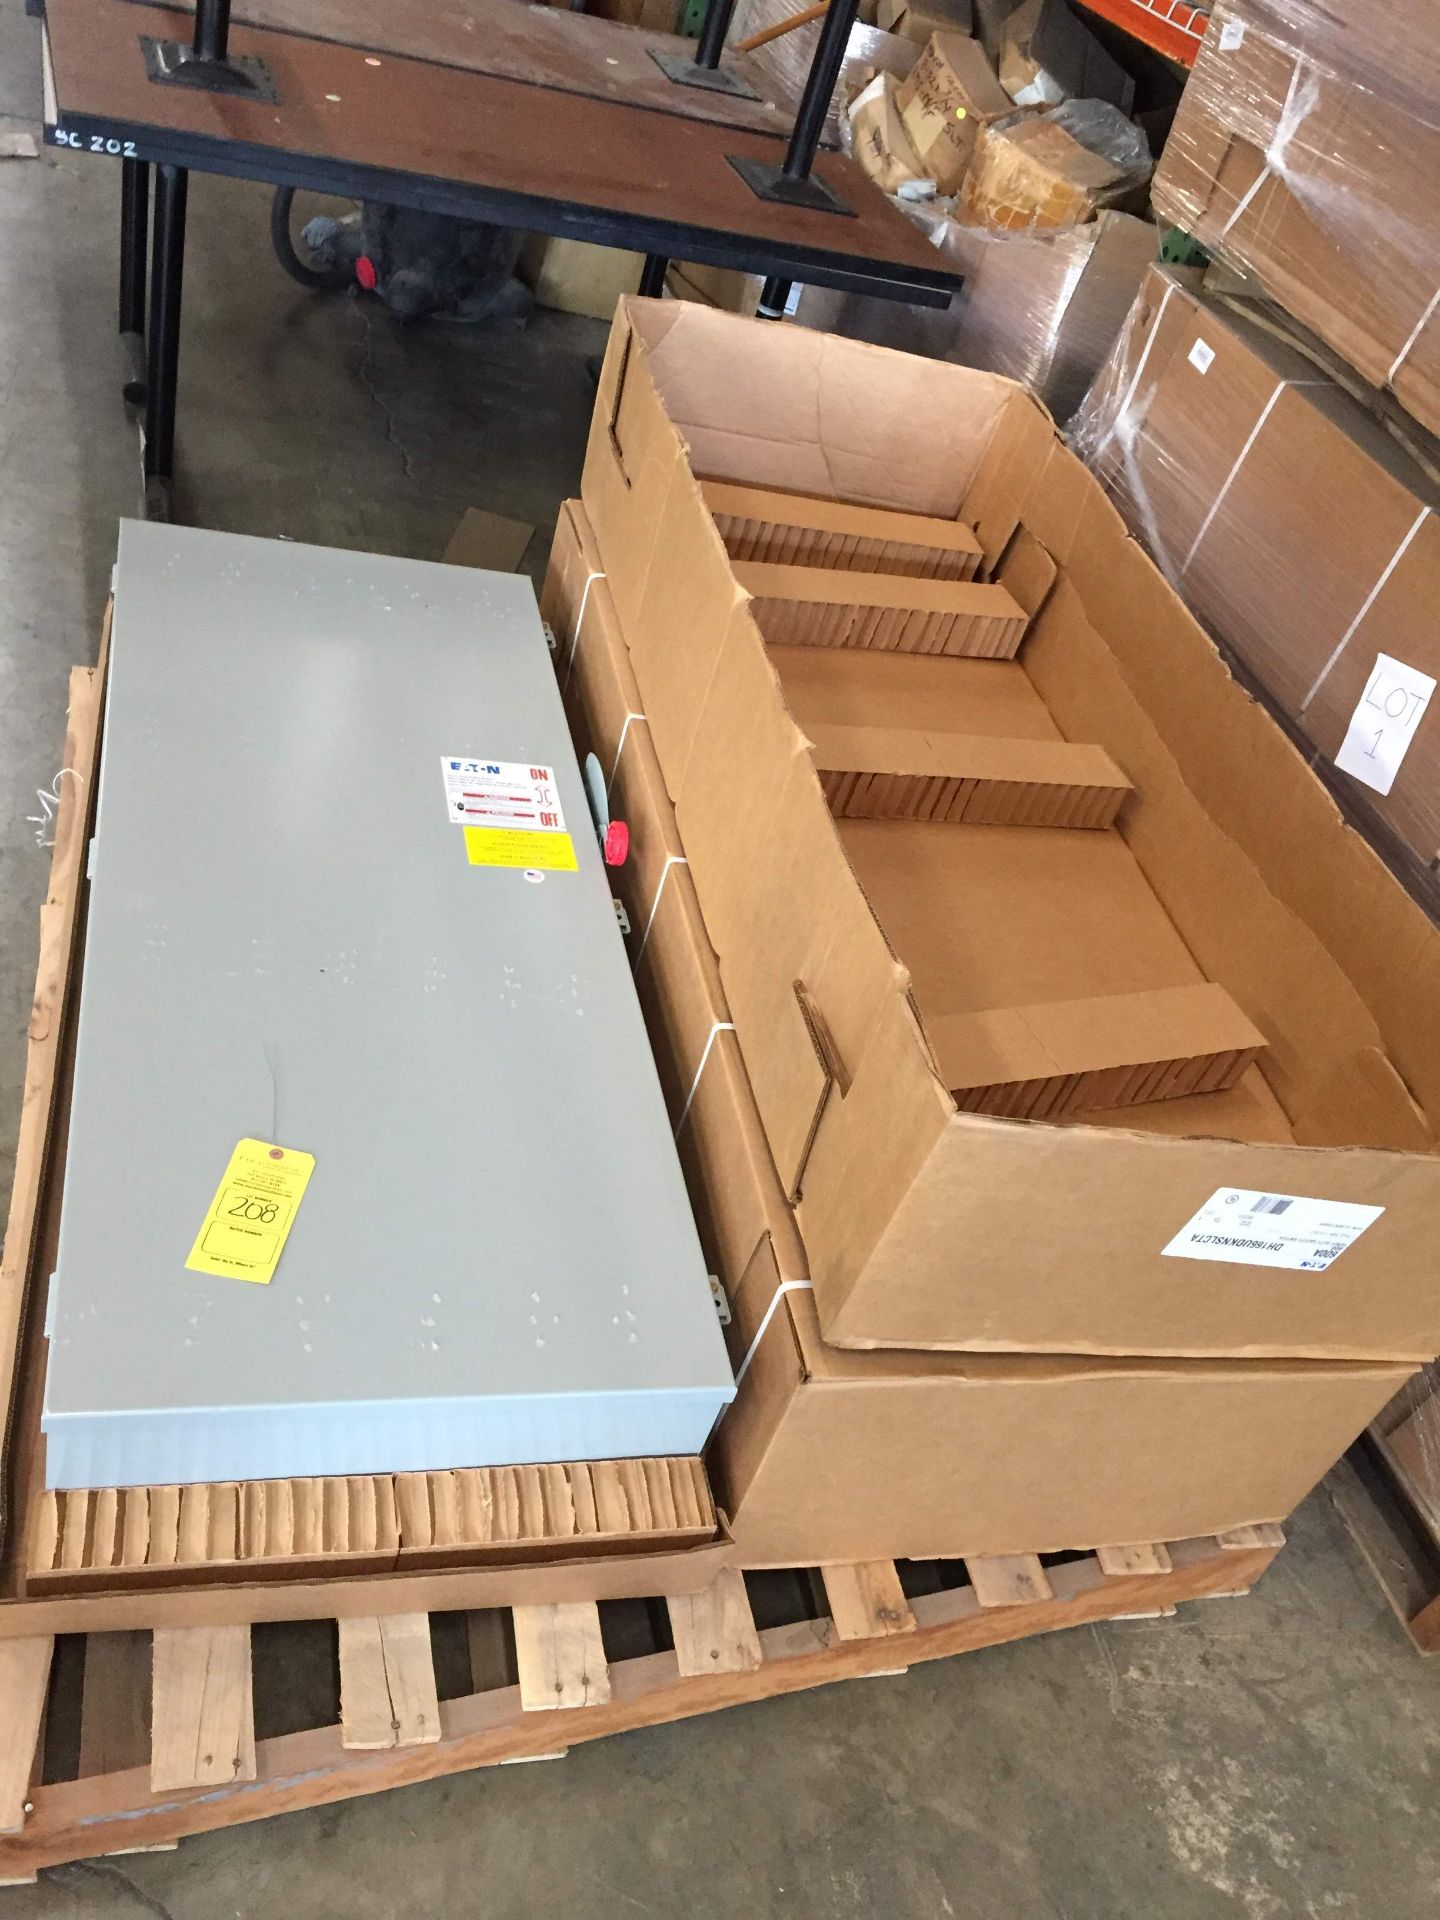 PALLET OF (2) EATON 600A HEAVY DUTY SAFETY SWITCH 1POLE NON-FUSIBLE TYPE 12 DUST-TIGHT C#